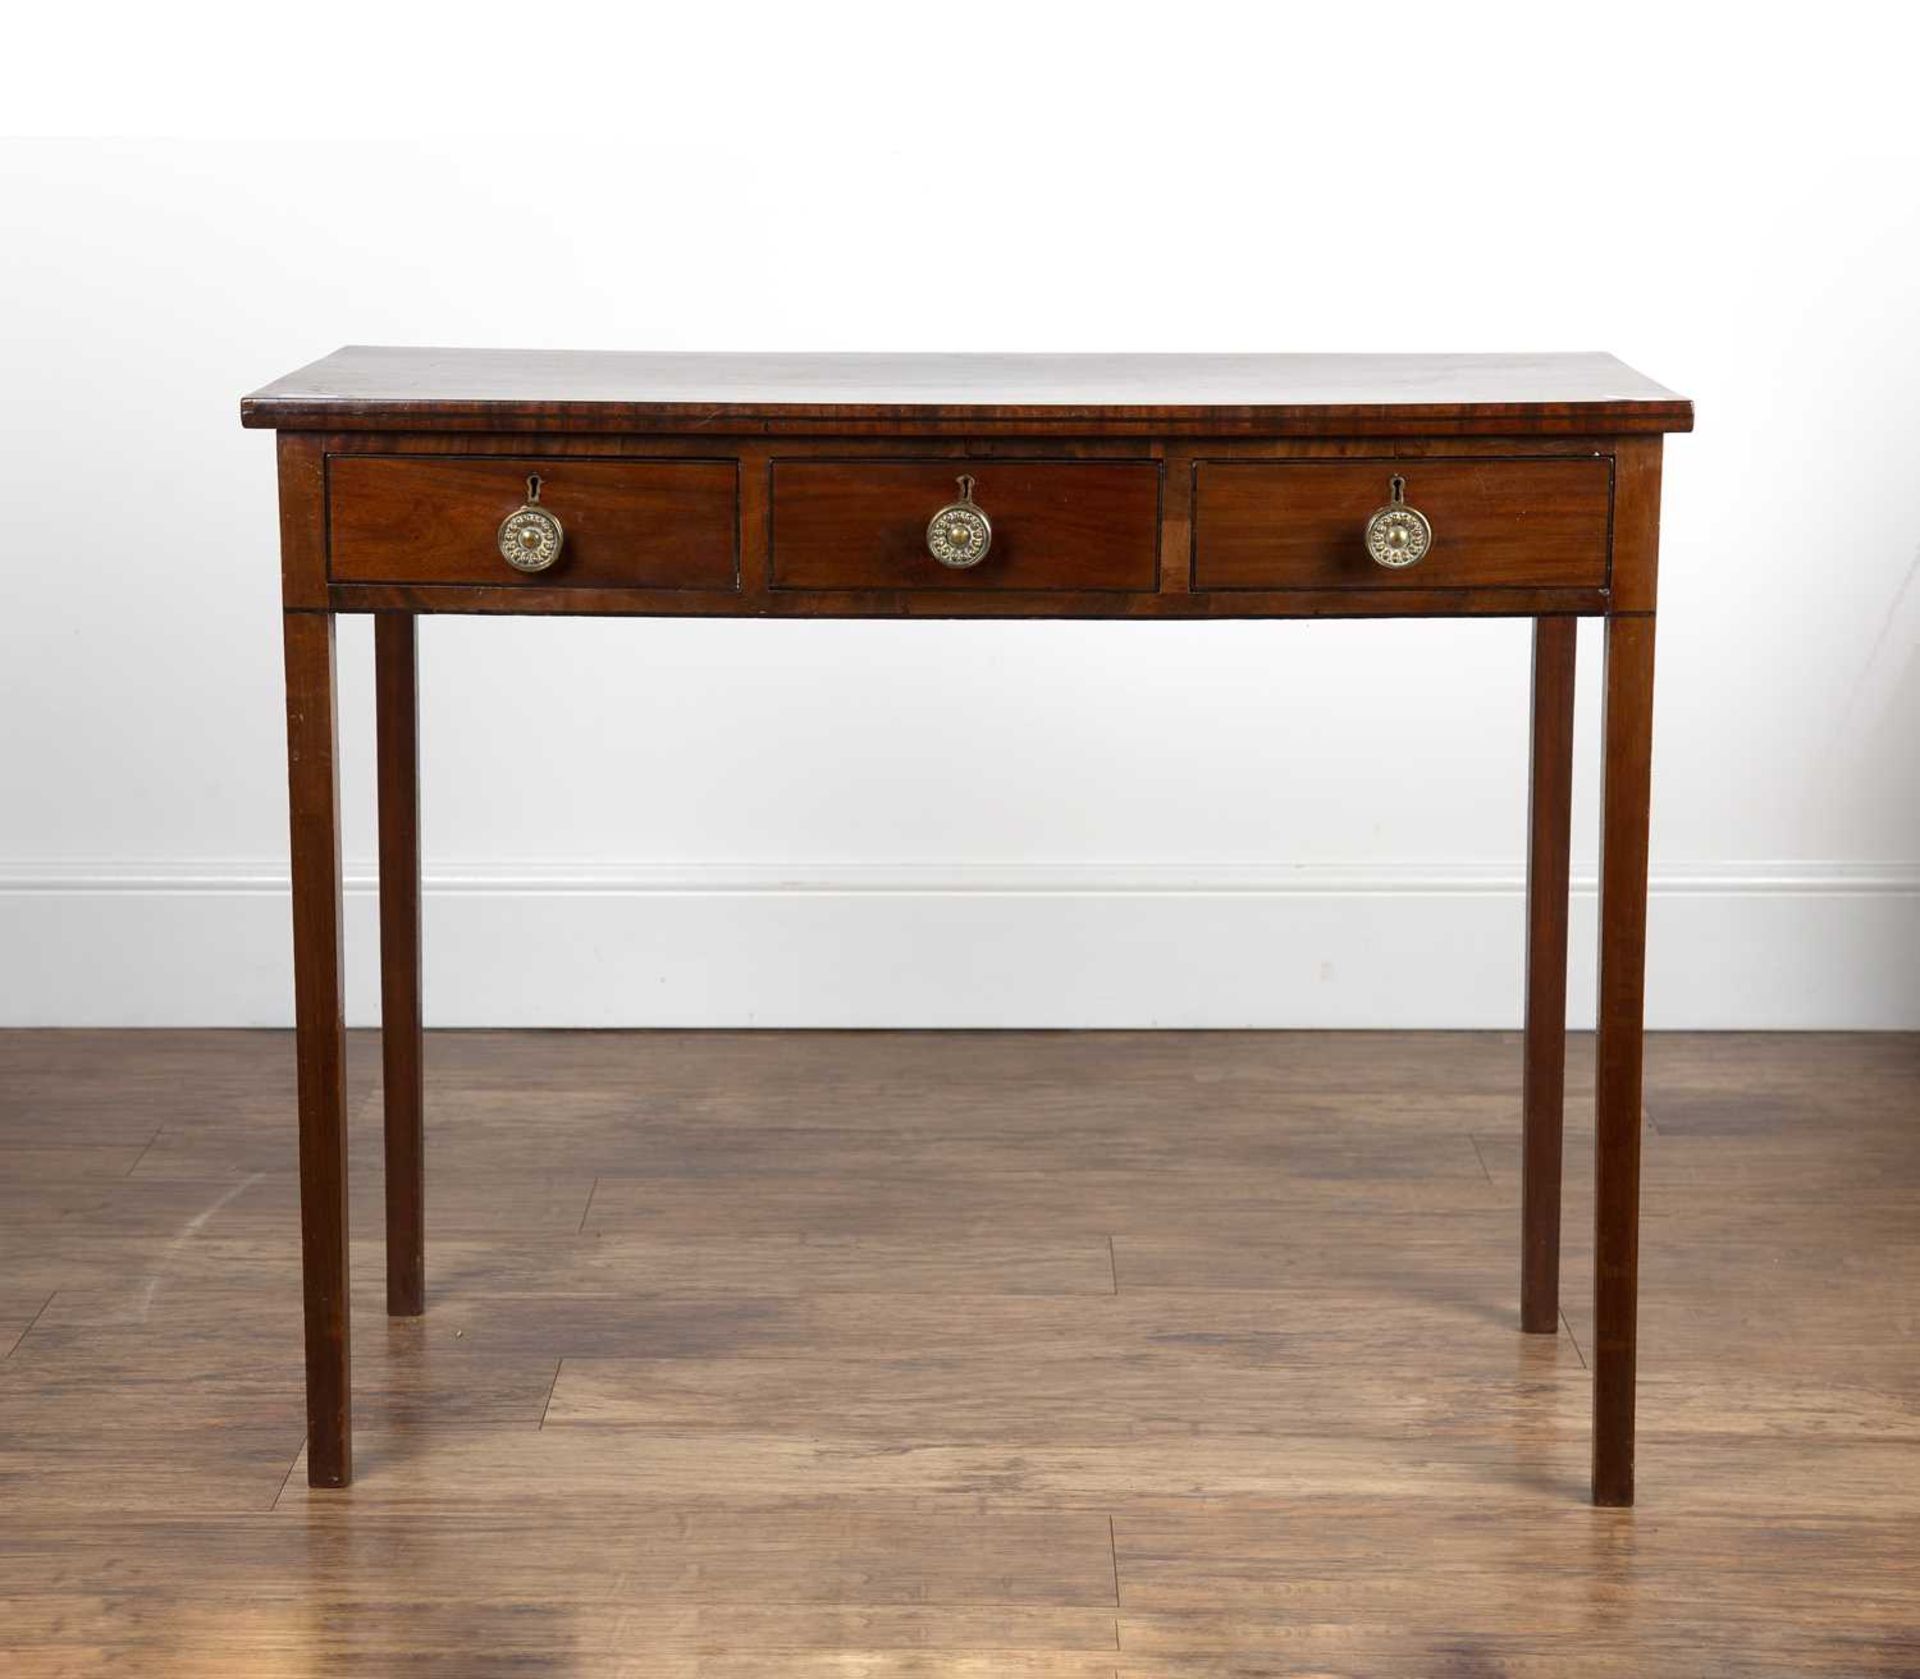 Mahogany side table 19th Century, fitted with three frieze drawers and round brass handles, standing